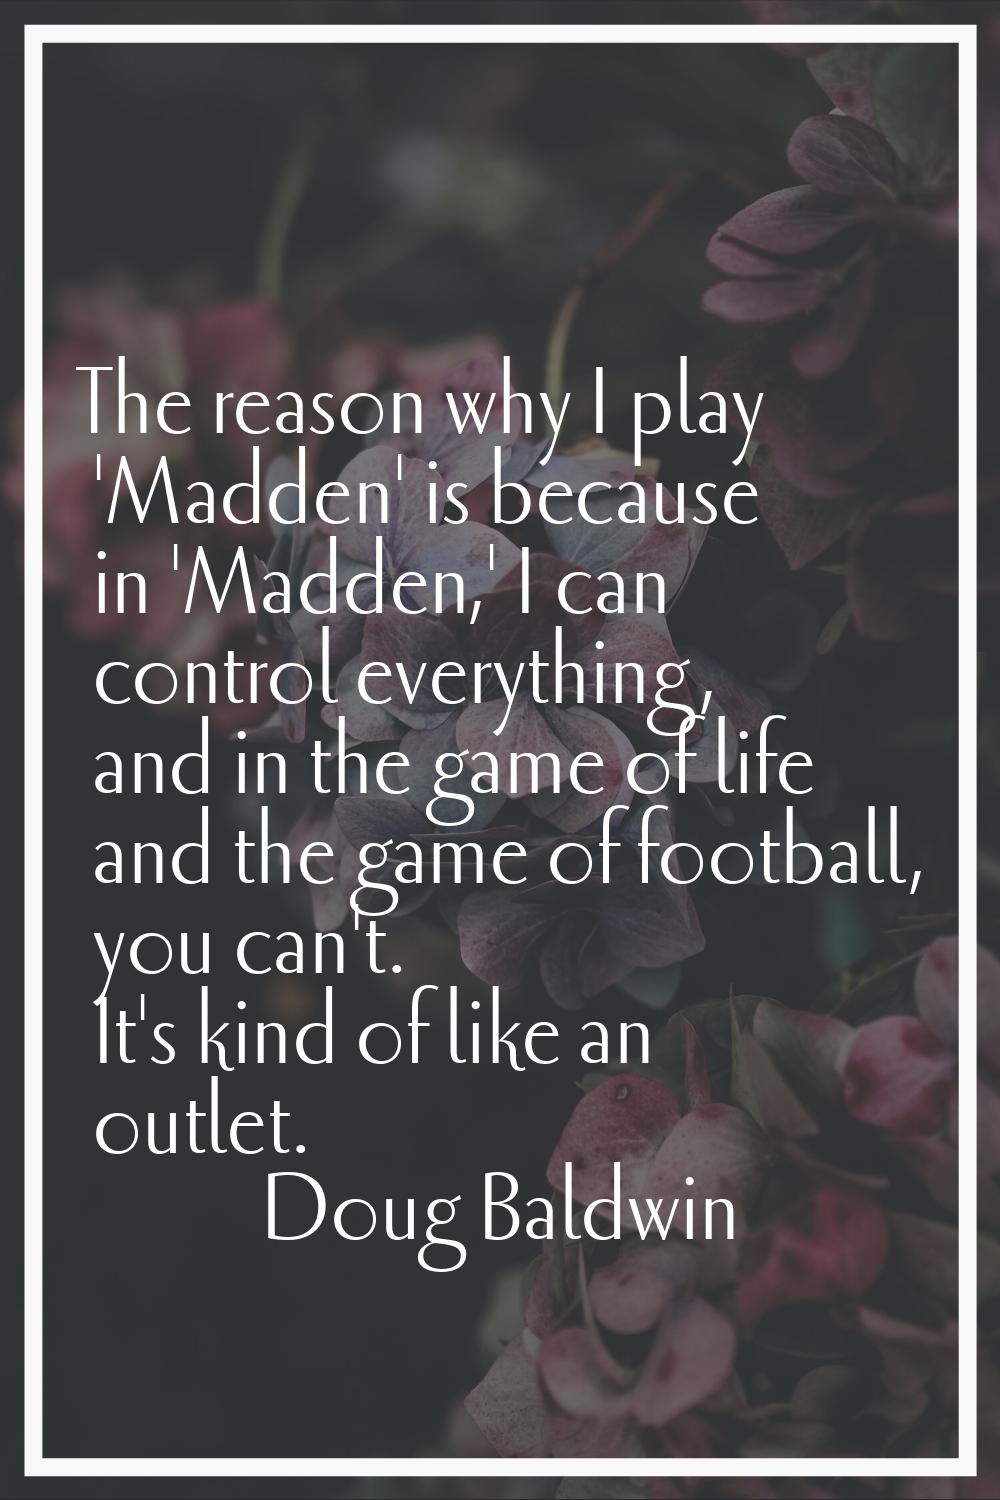 The reason why I play 'Madden' is because in 'Madden,' I can control everything, and in the game of